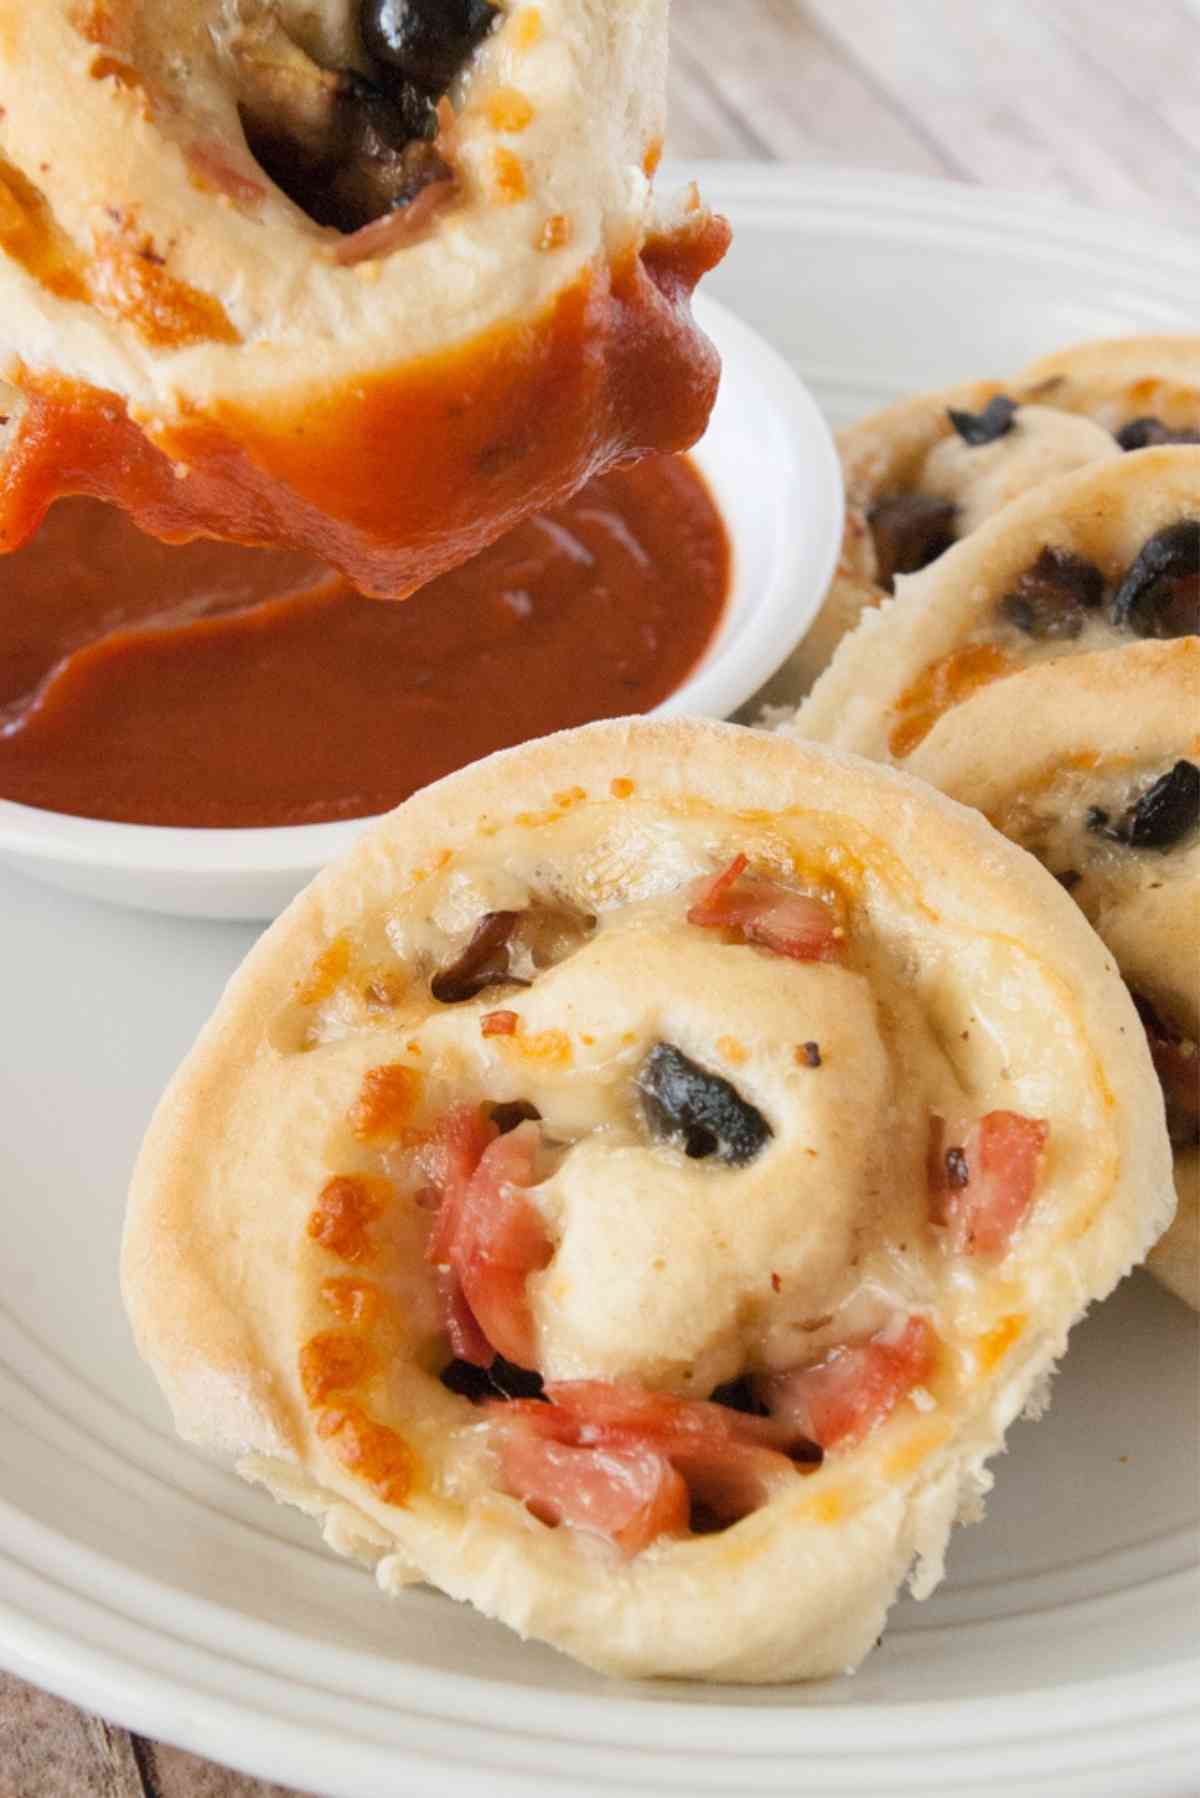 A pizza roll being dipped in pizza sauce.